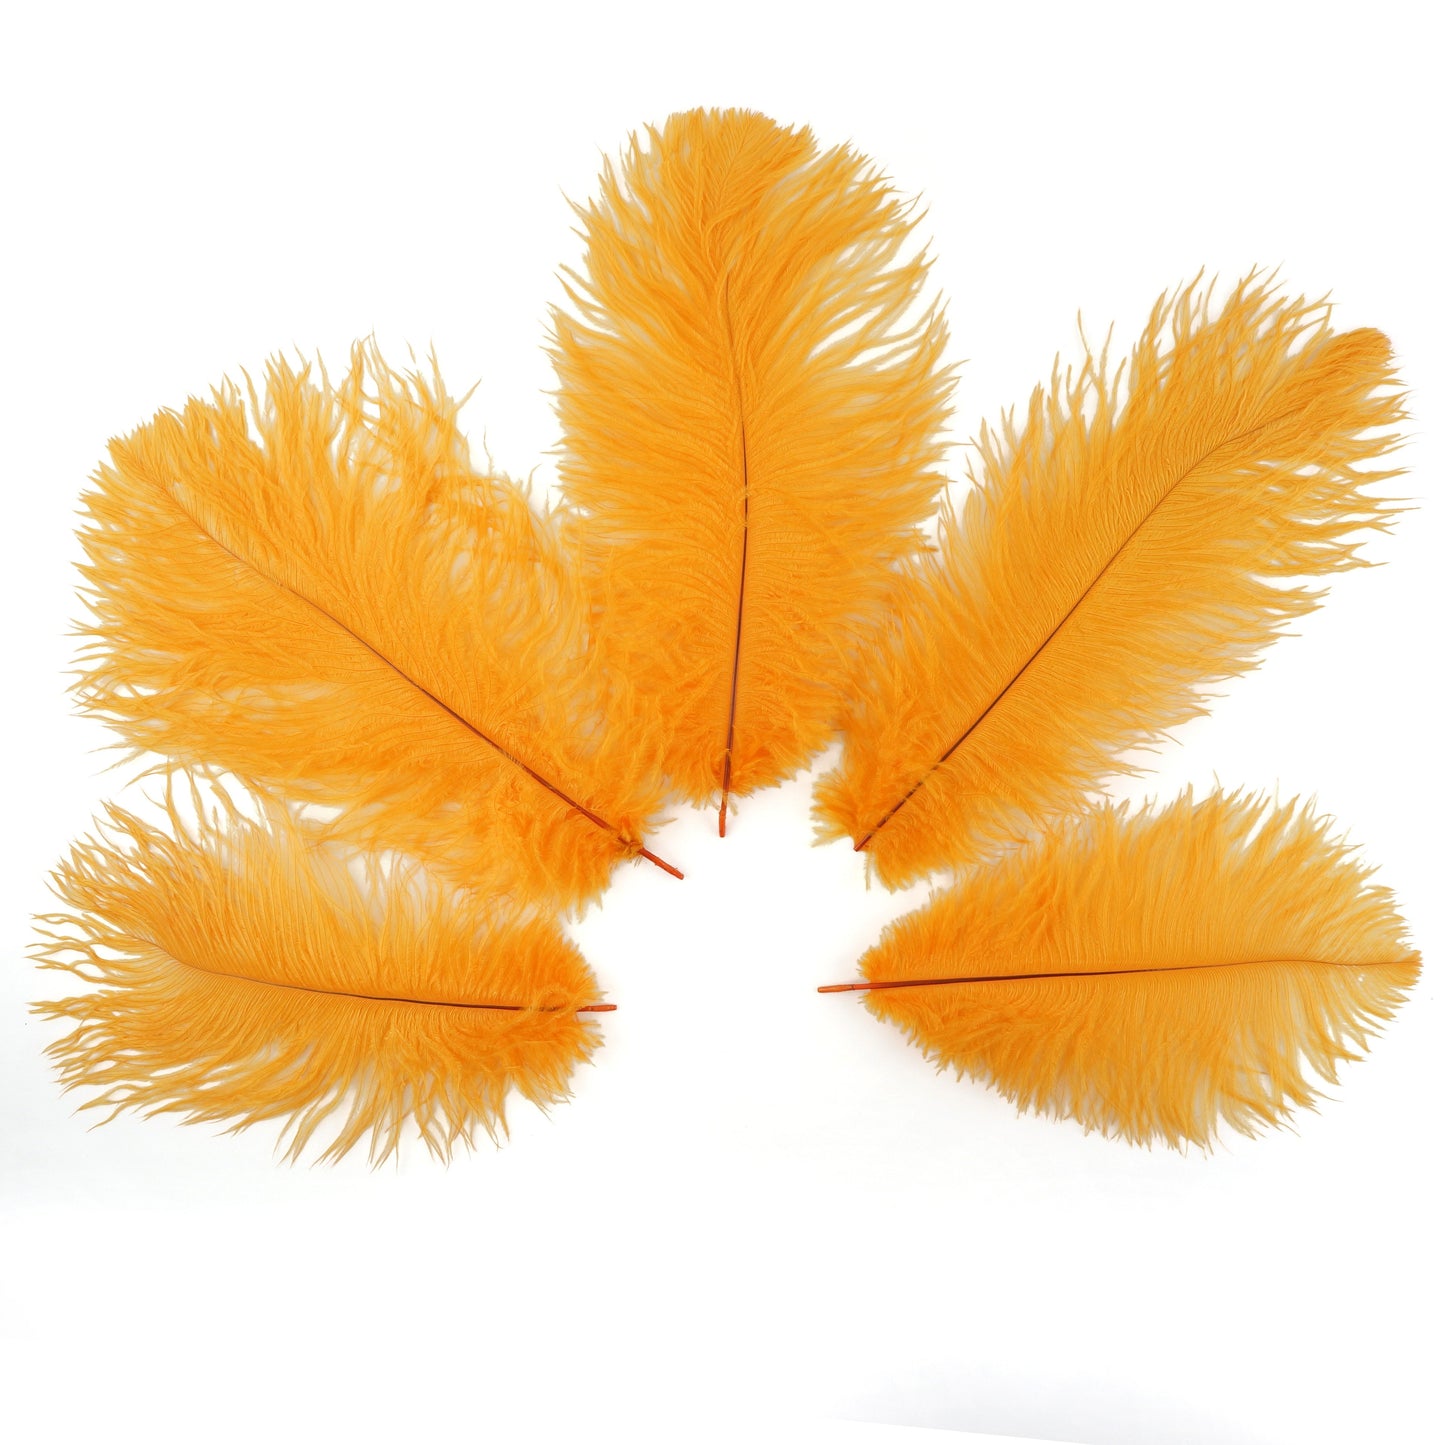 Ostrich Feathers 9-12" Drabs - Mango